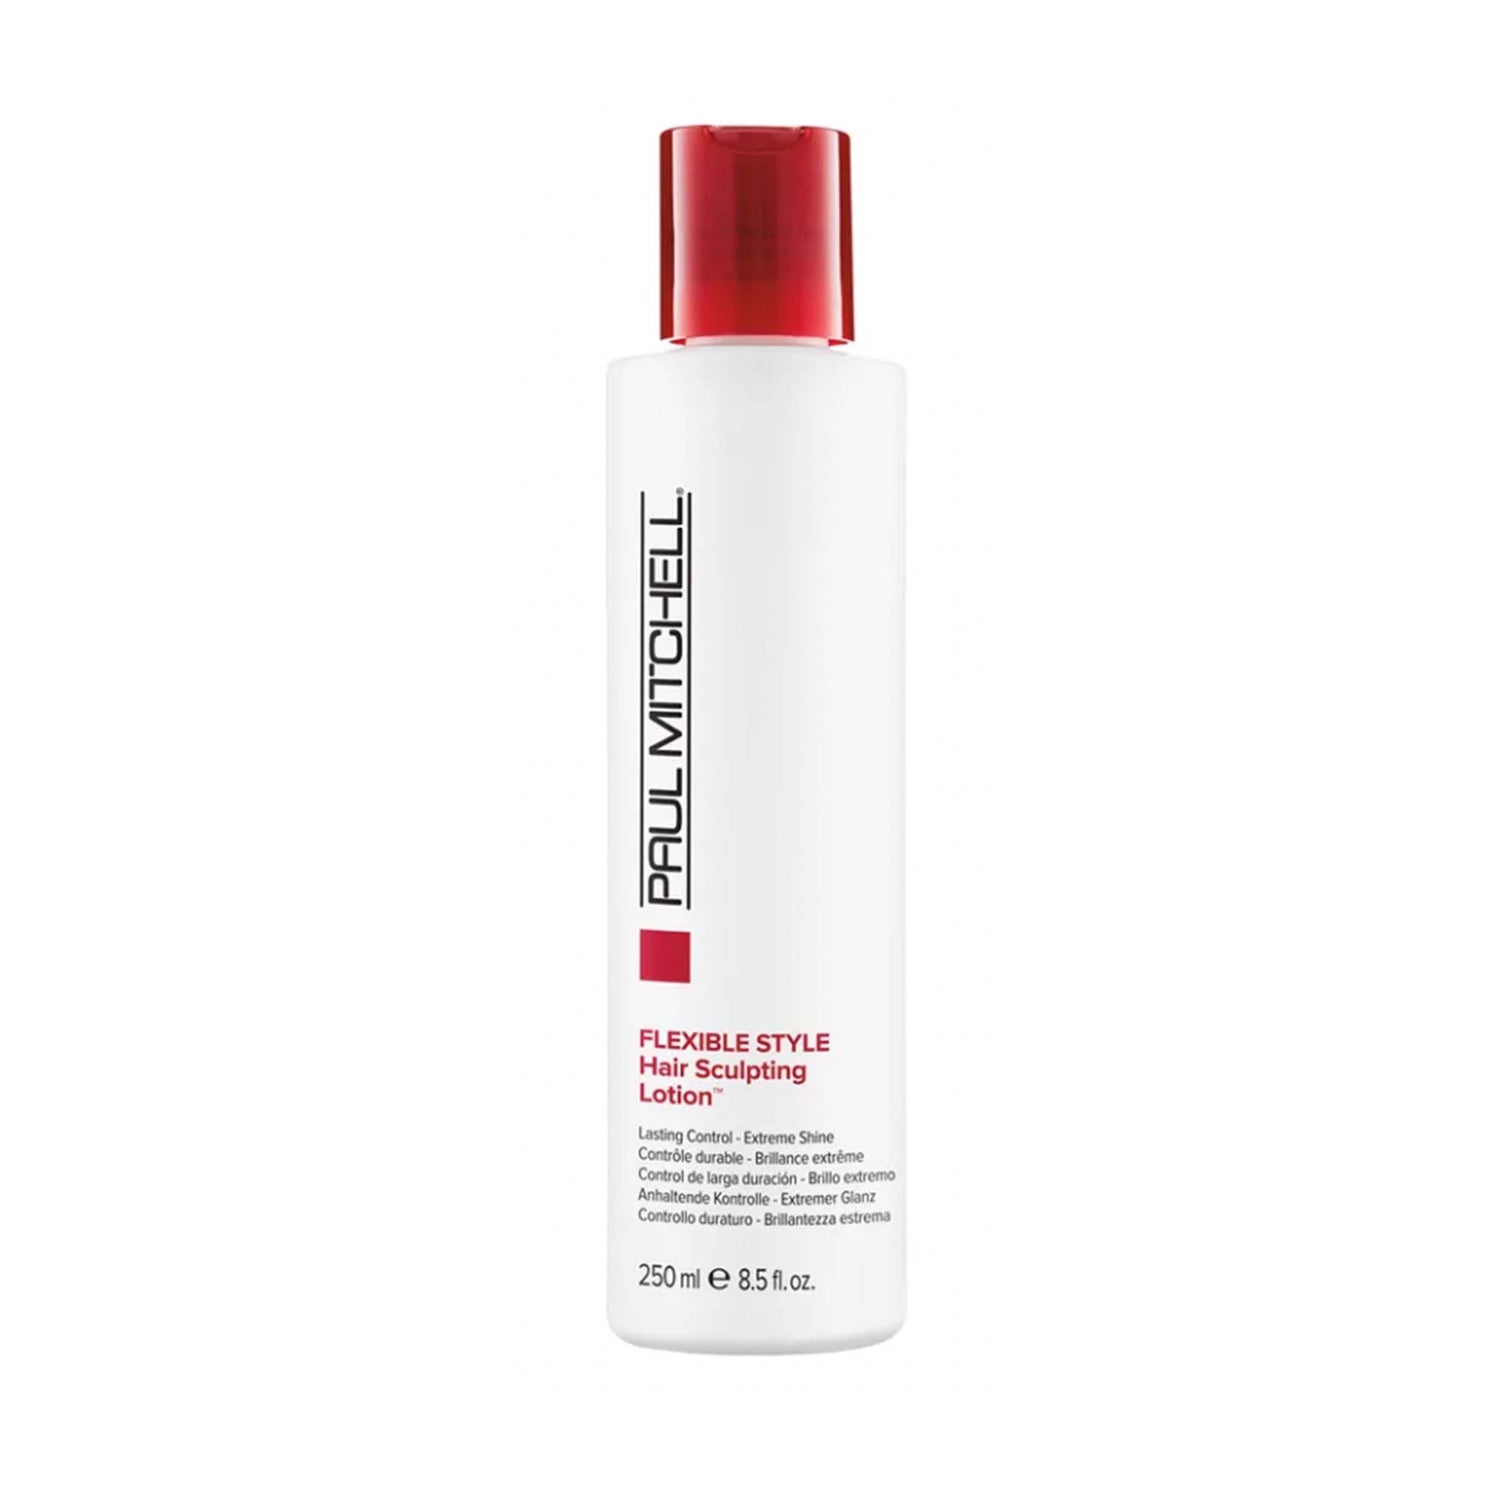 Paul Mitchell Flexible Style Hair Sculpting Lotion 8.5oz